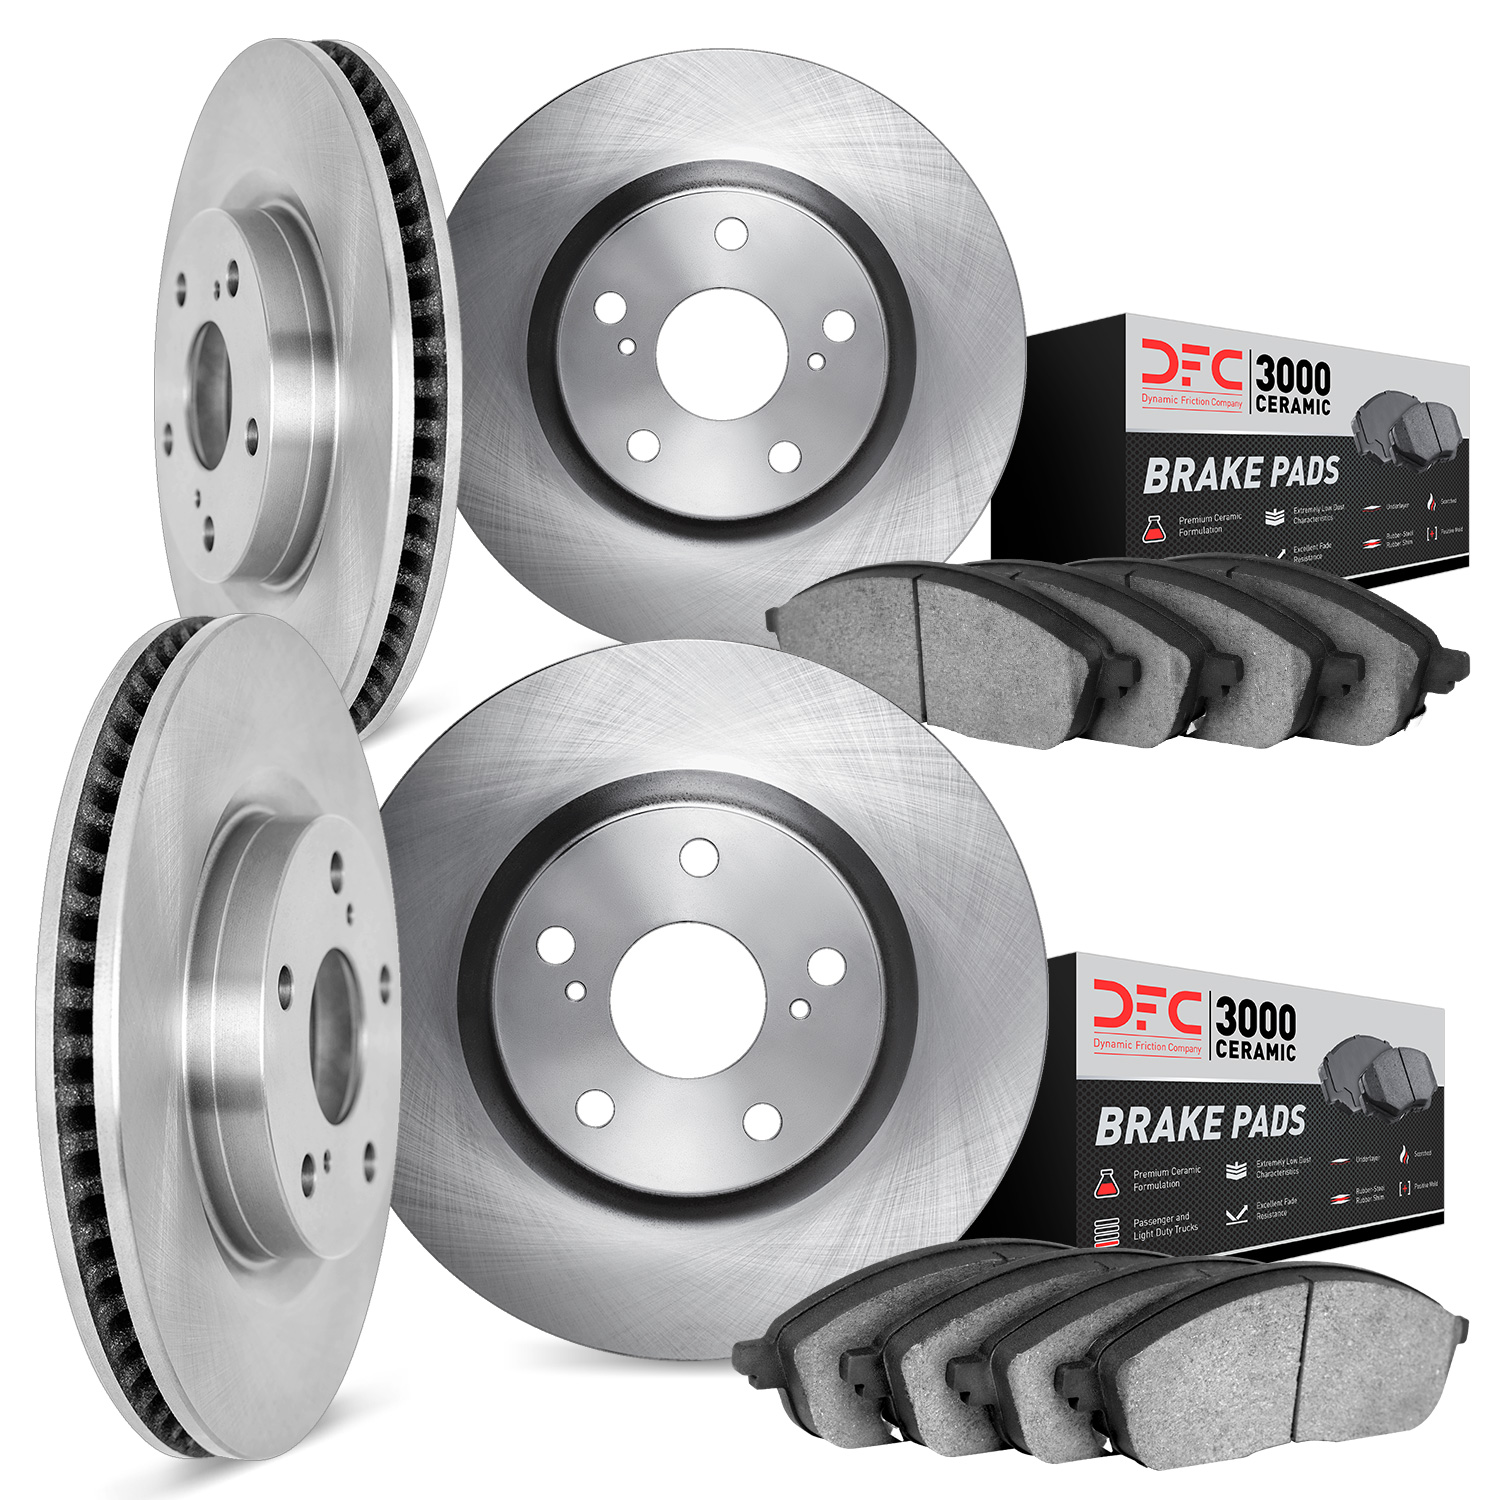 6304-75016 Brake Rotors with 3000-Series Ceramic Brake Pads Kit, 2007-2011 Lexus/Toyota/Scion, Position: Front and Rear